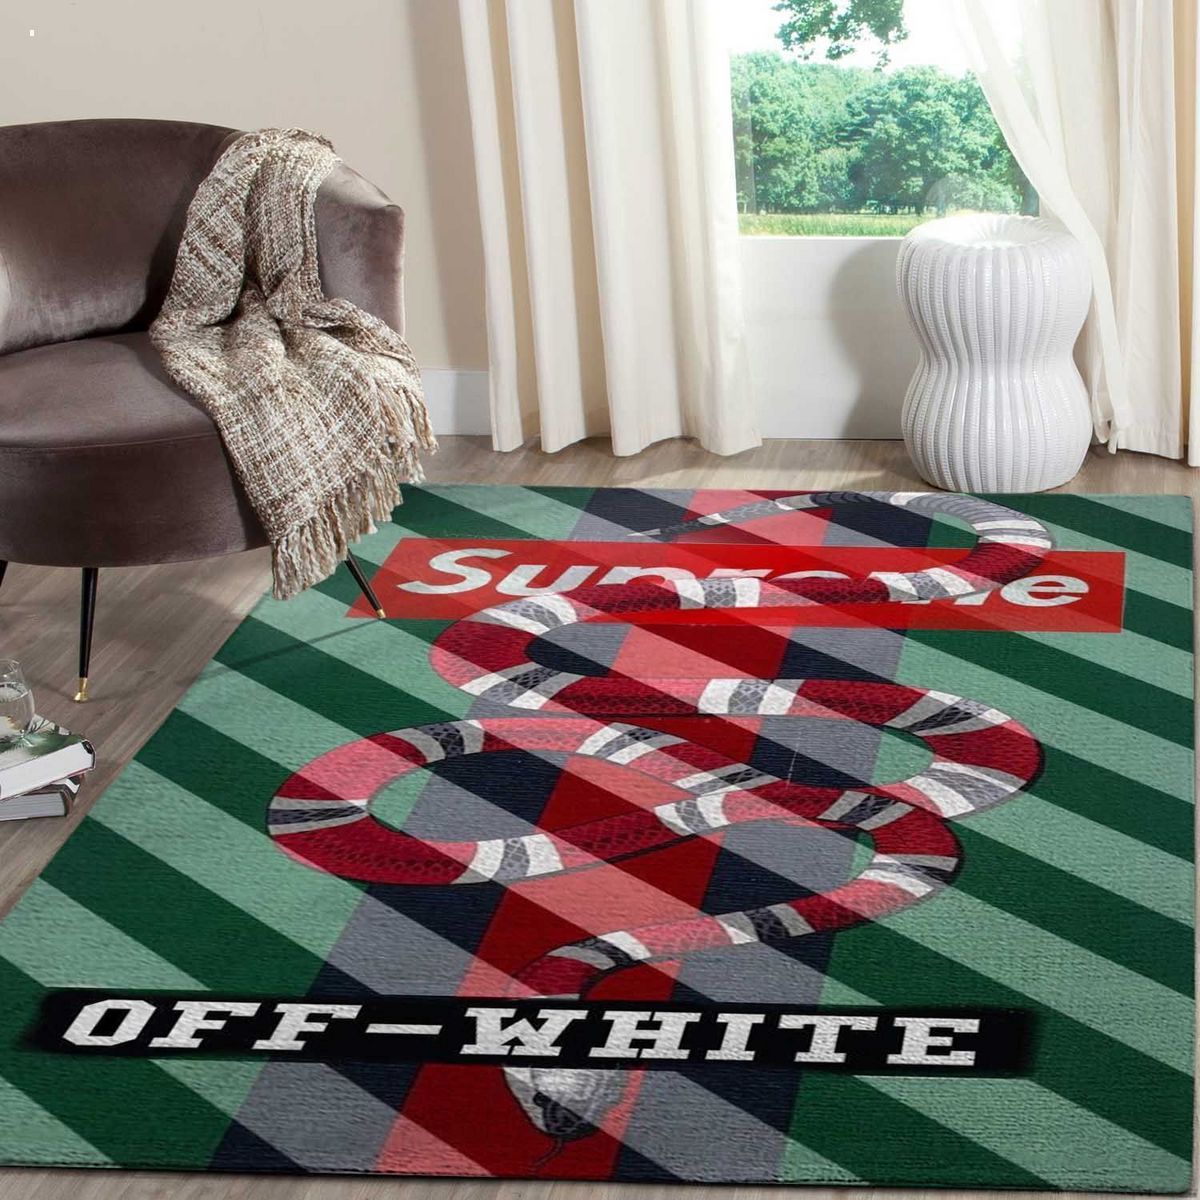 Gucci Supreme Off White Luxury Brand Carpet Rug Limited Edition